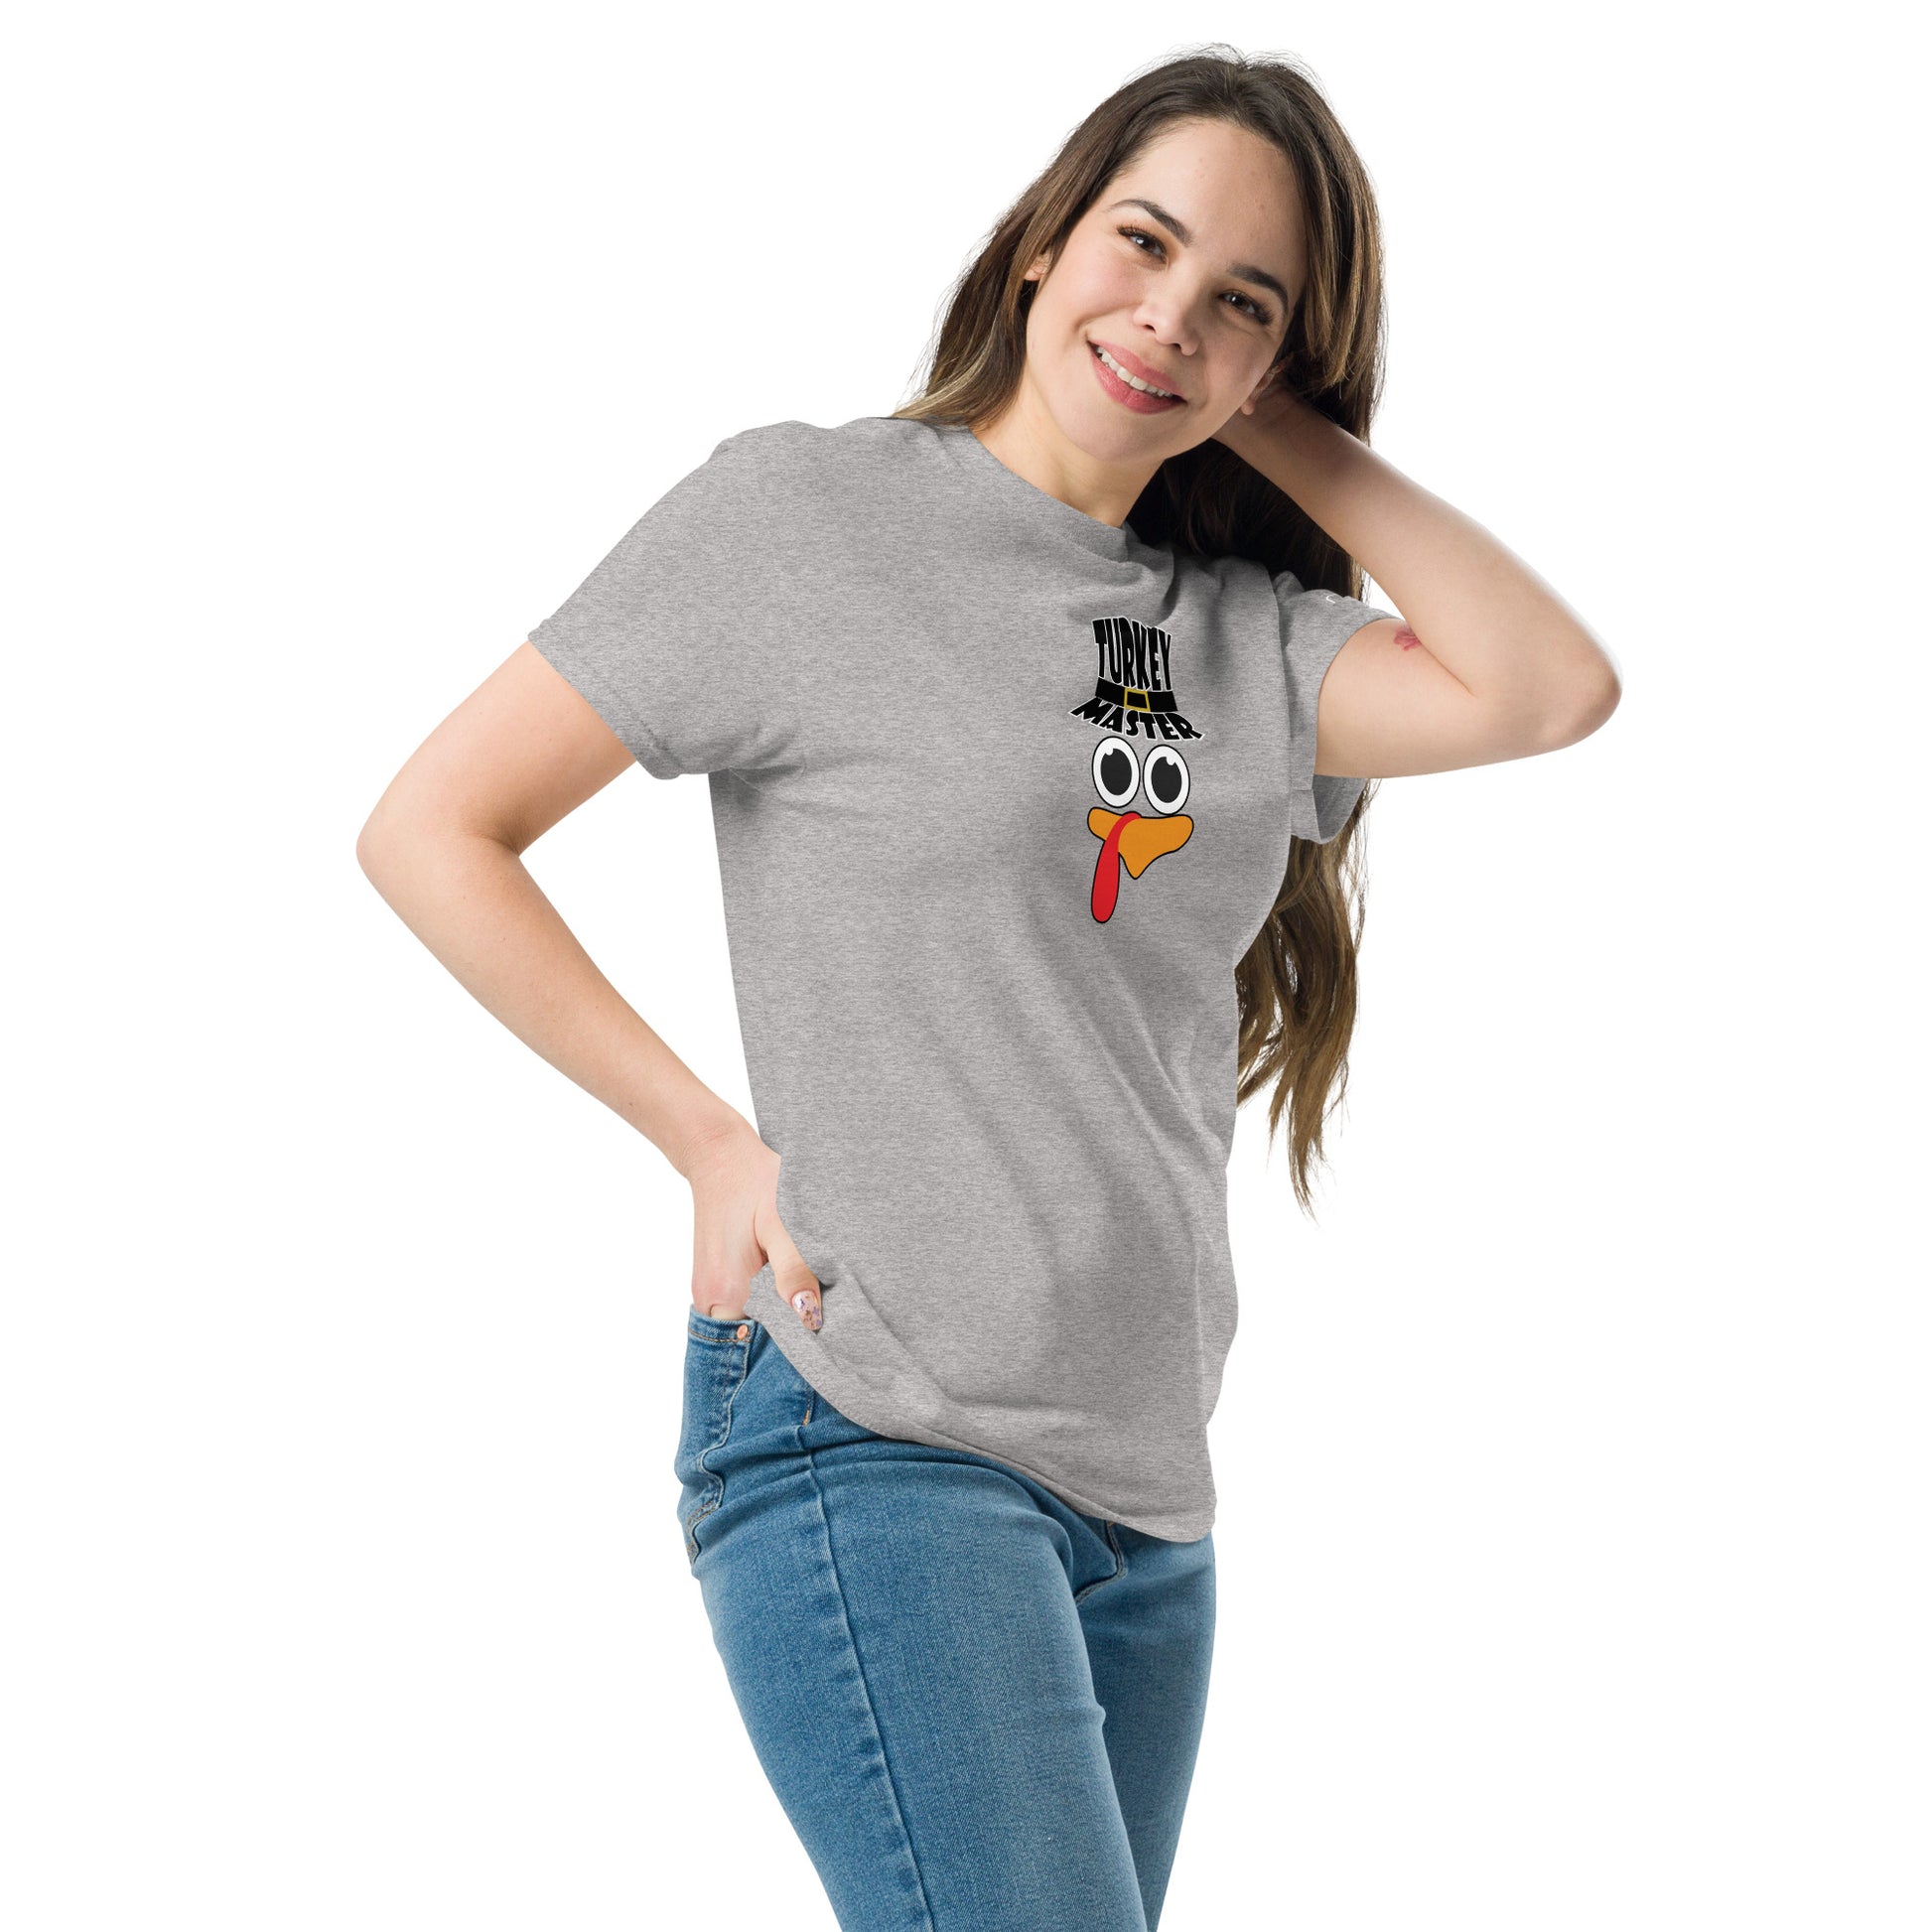 A woman with long brown hair is wearing a grey t-shirt featuring a playful turkey graphic. The turkey has cartoonish eyes, an orange beak, and a red snood, along with a black hat that reads "TURKEY MASTER" in bold letters. She is smiling warmly and posing with one hand on her hip and the other touching her hair, creating a relaxed and confident look. The background is white, highlighting the design of the shirt.